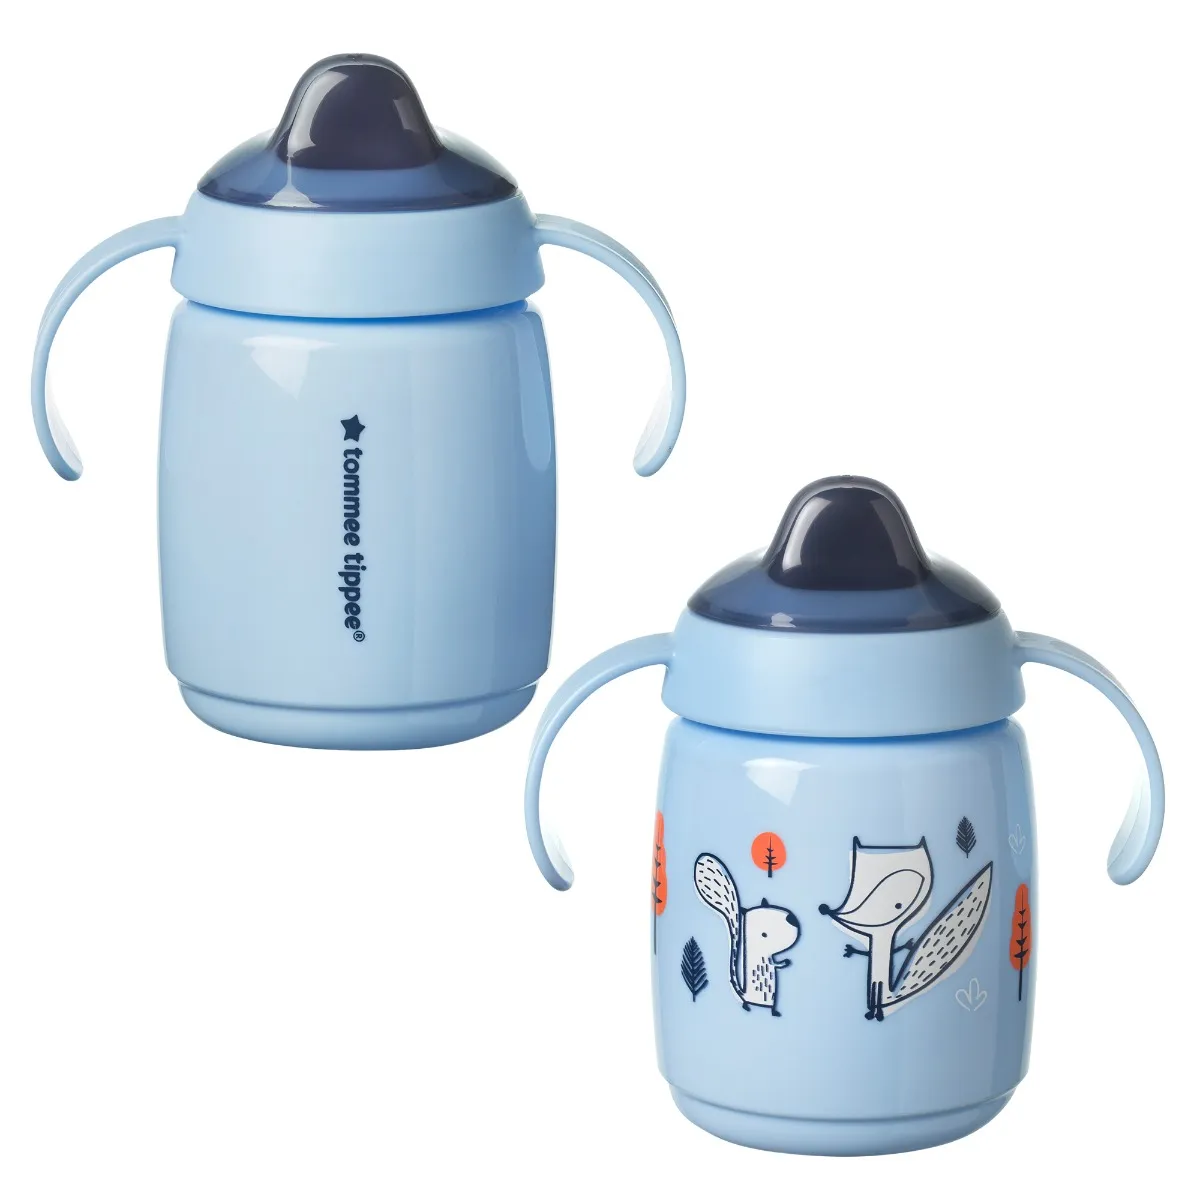 Tommee Tippee Insulated Sippee Toddler Sippy Cup 2 Pack, 12 month+ Green &  Teal